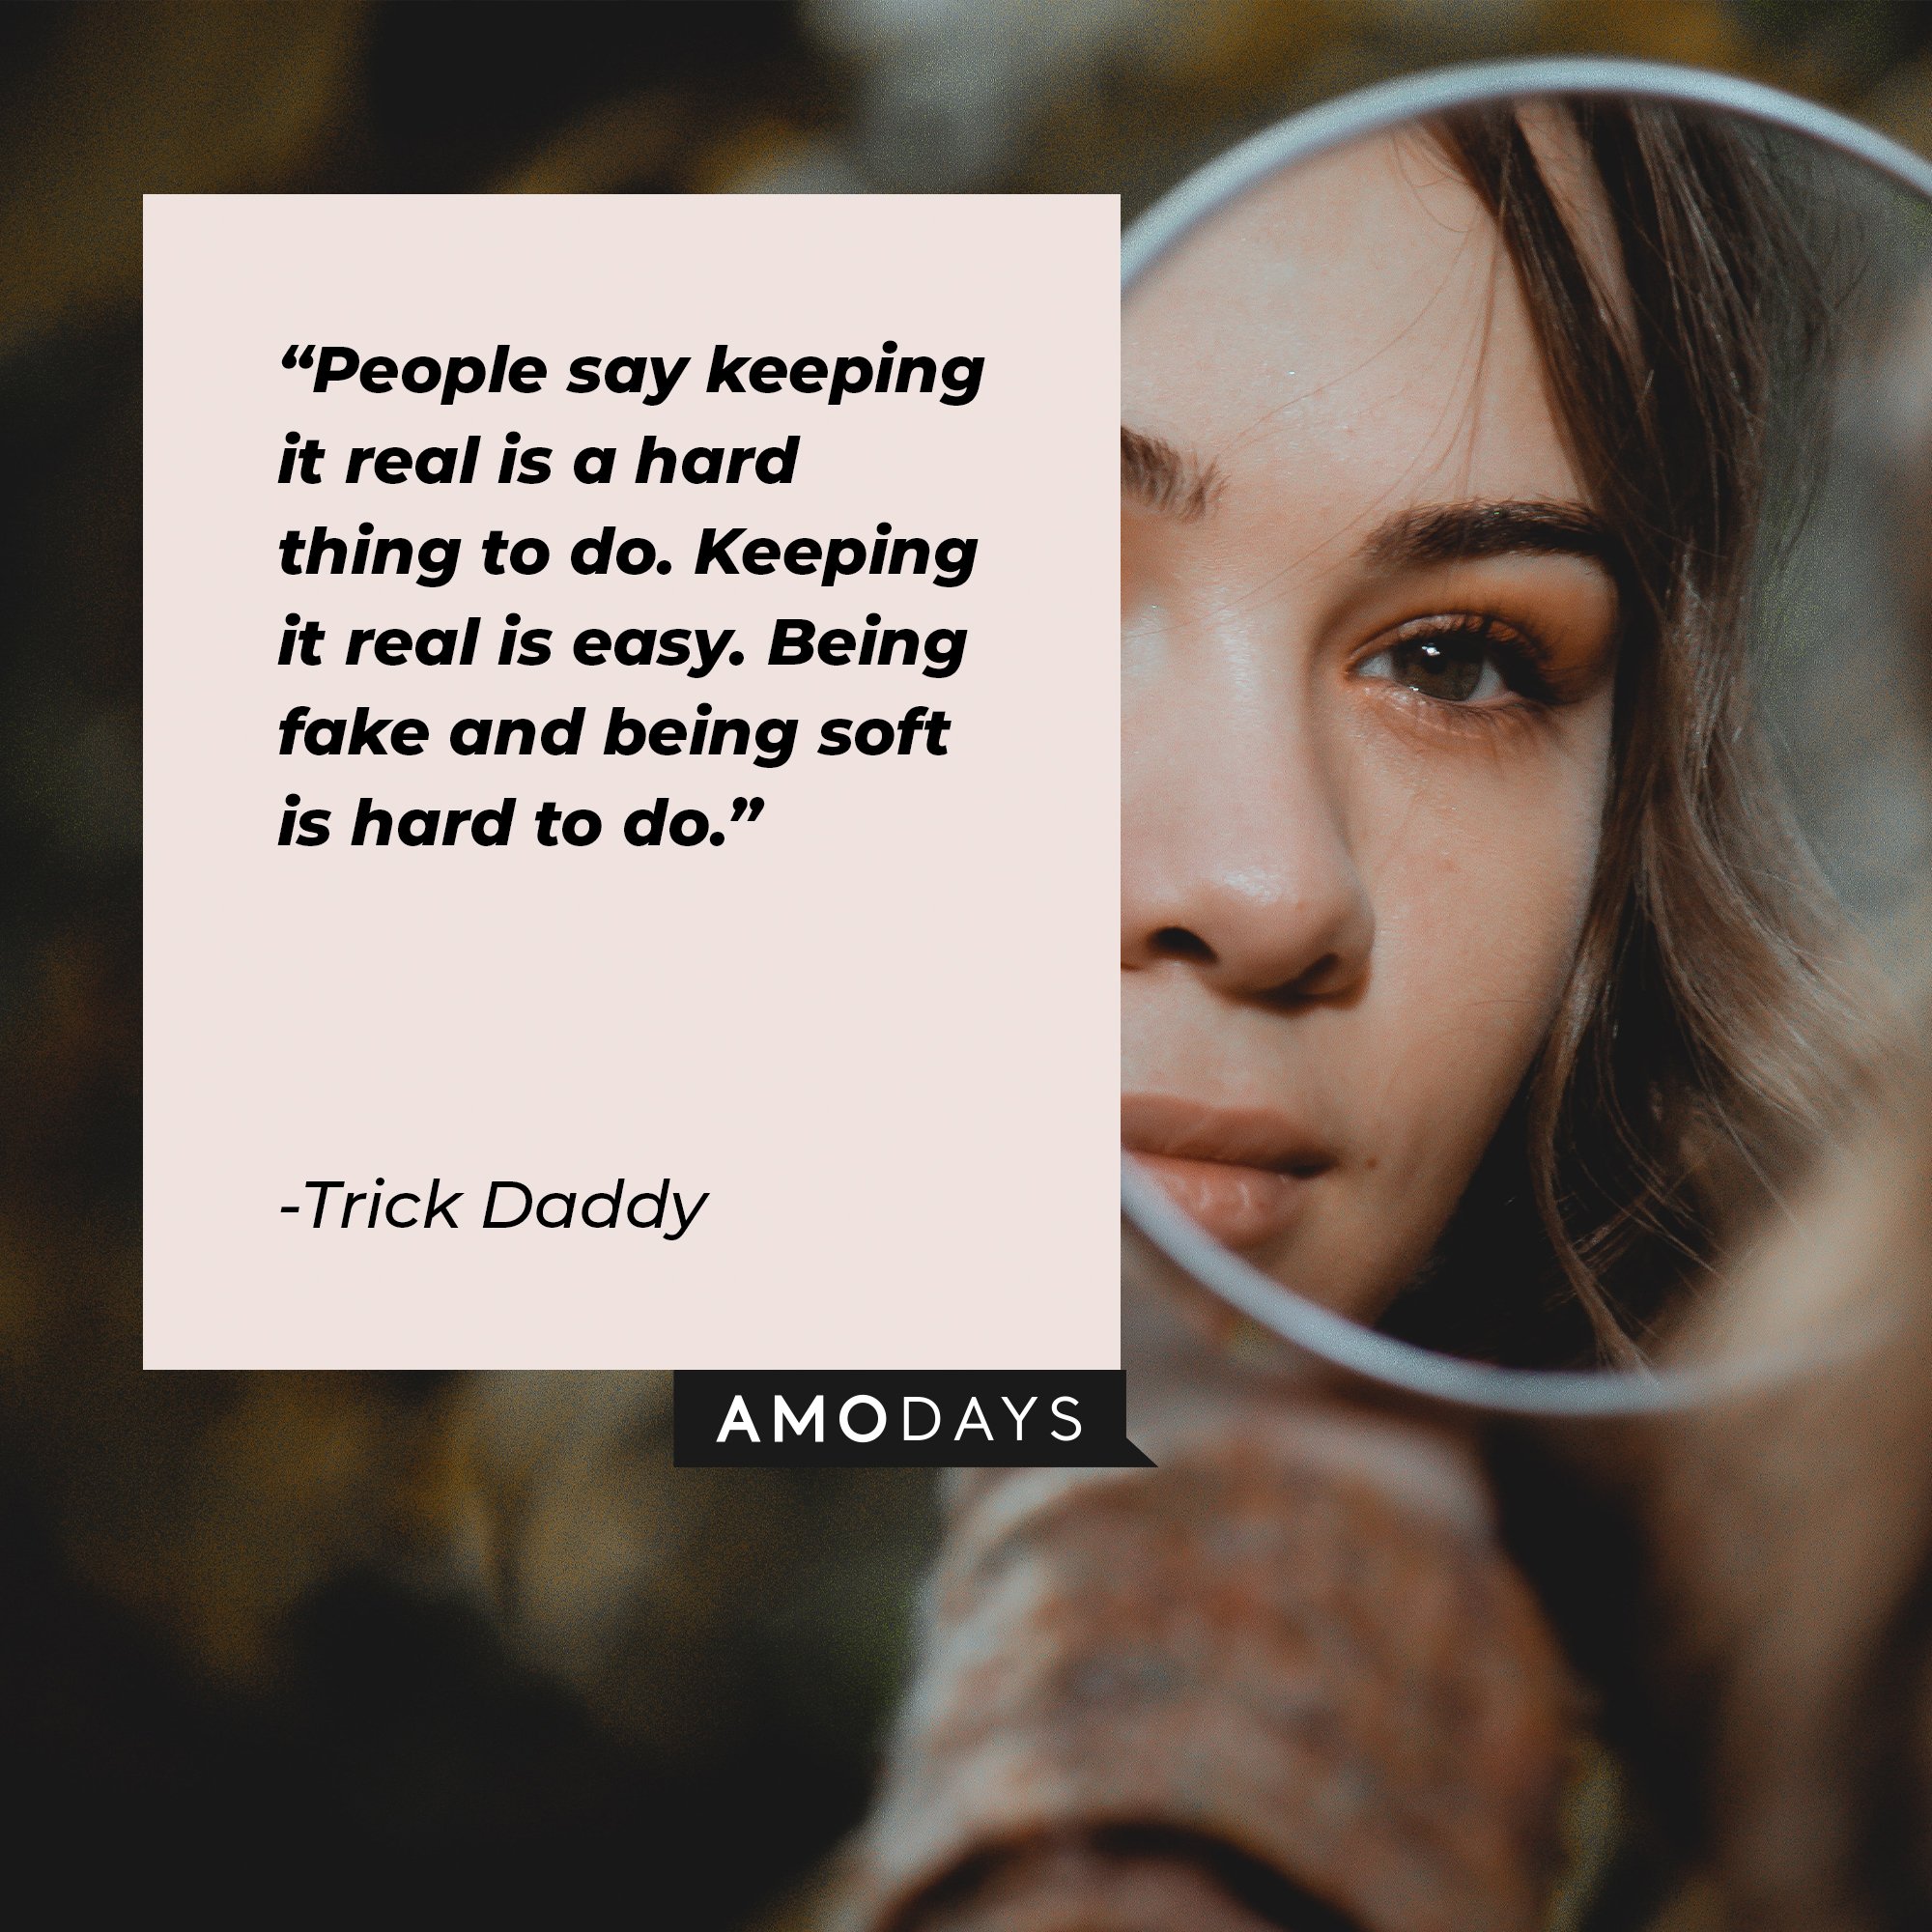 Trick Daddy’s quote: "People say keeping it real is a hard thing to do. Keeping it real is easy. Being fake and being soft is hard to do." | Image: AmoDays